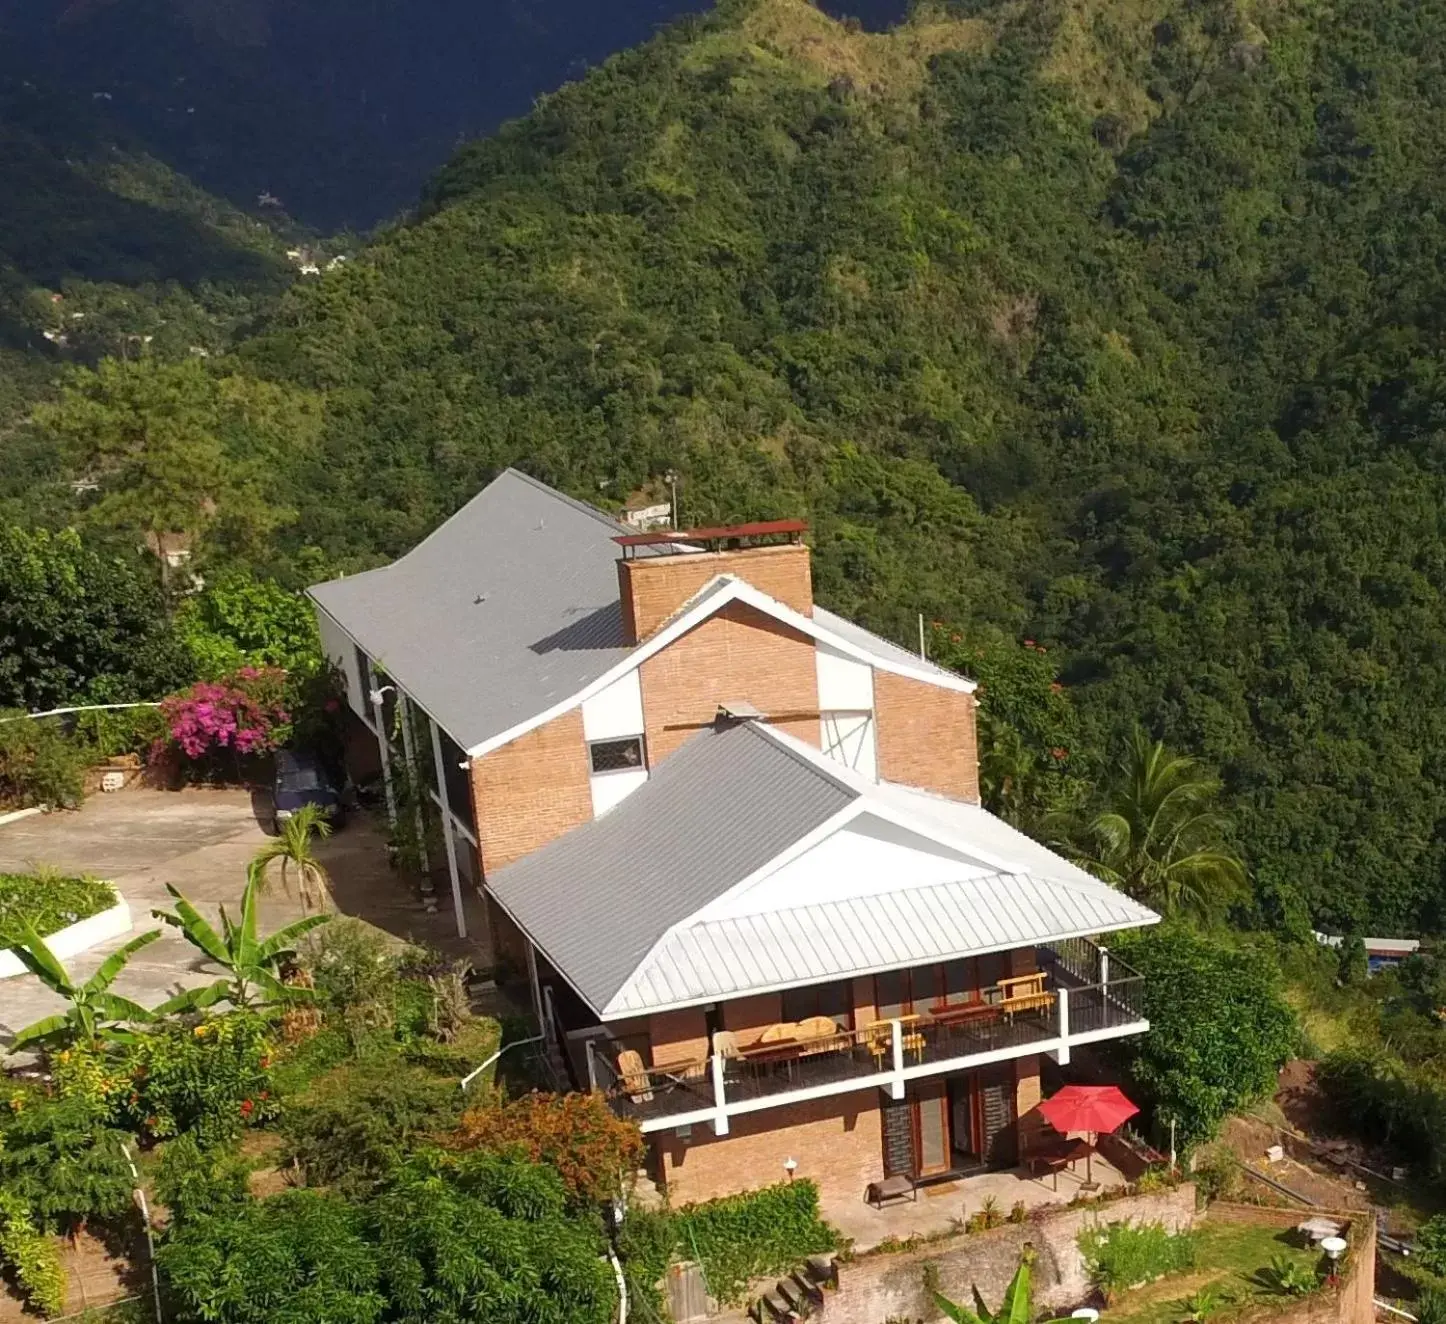 Property building, Bird's-eye View in Tranquility Estate